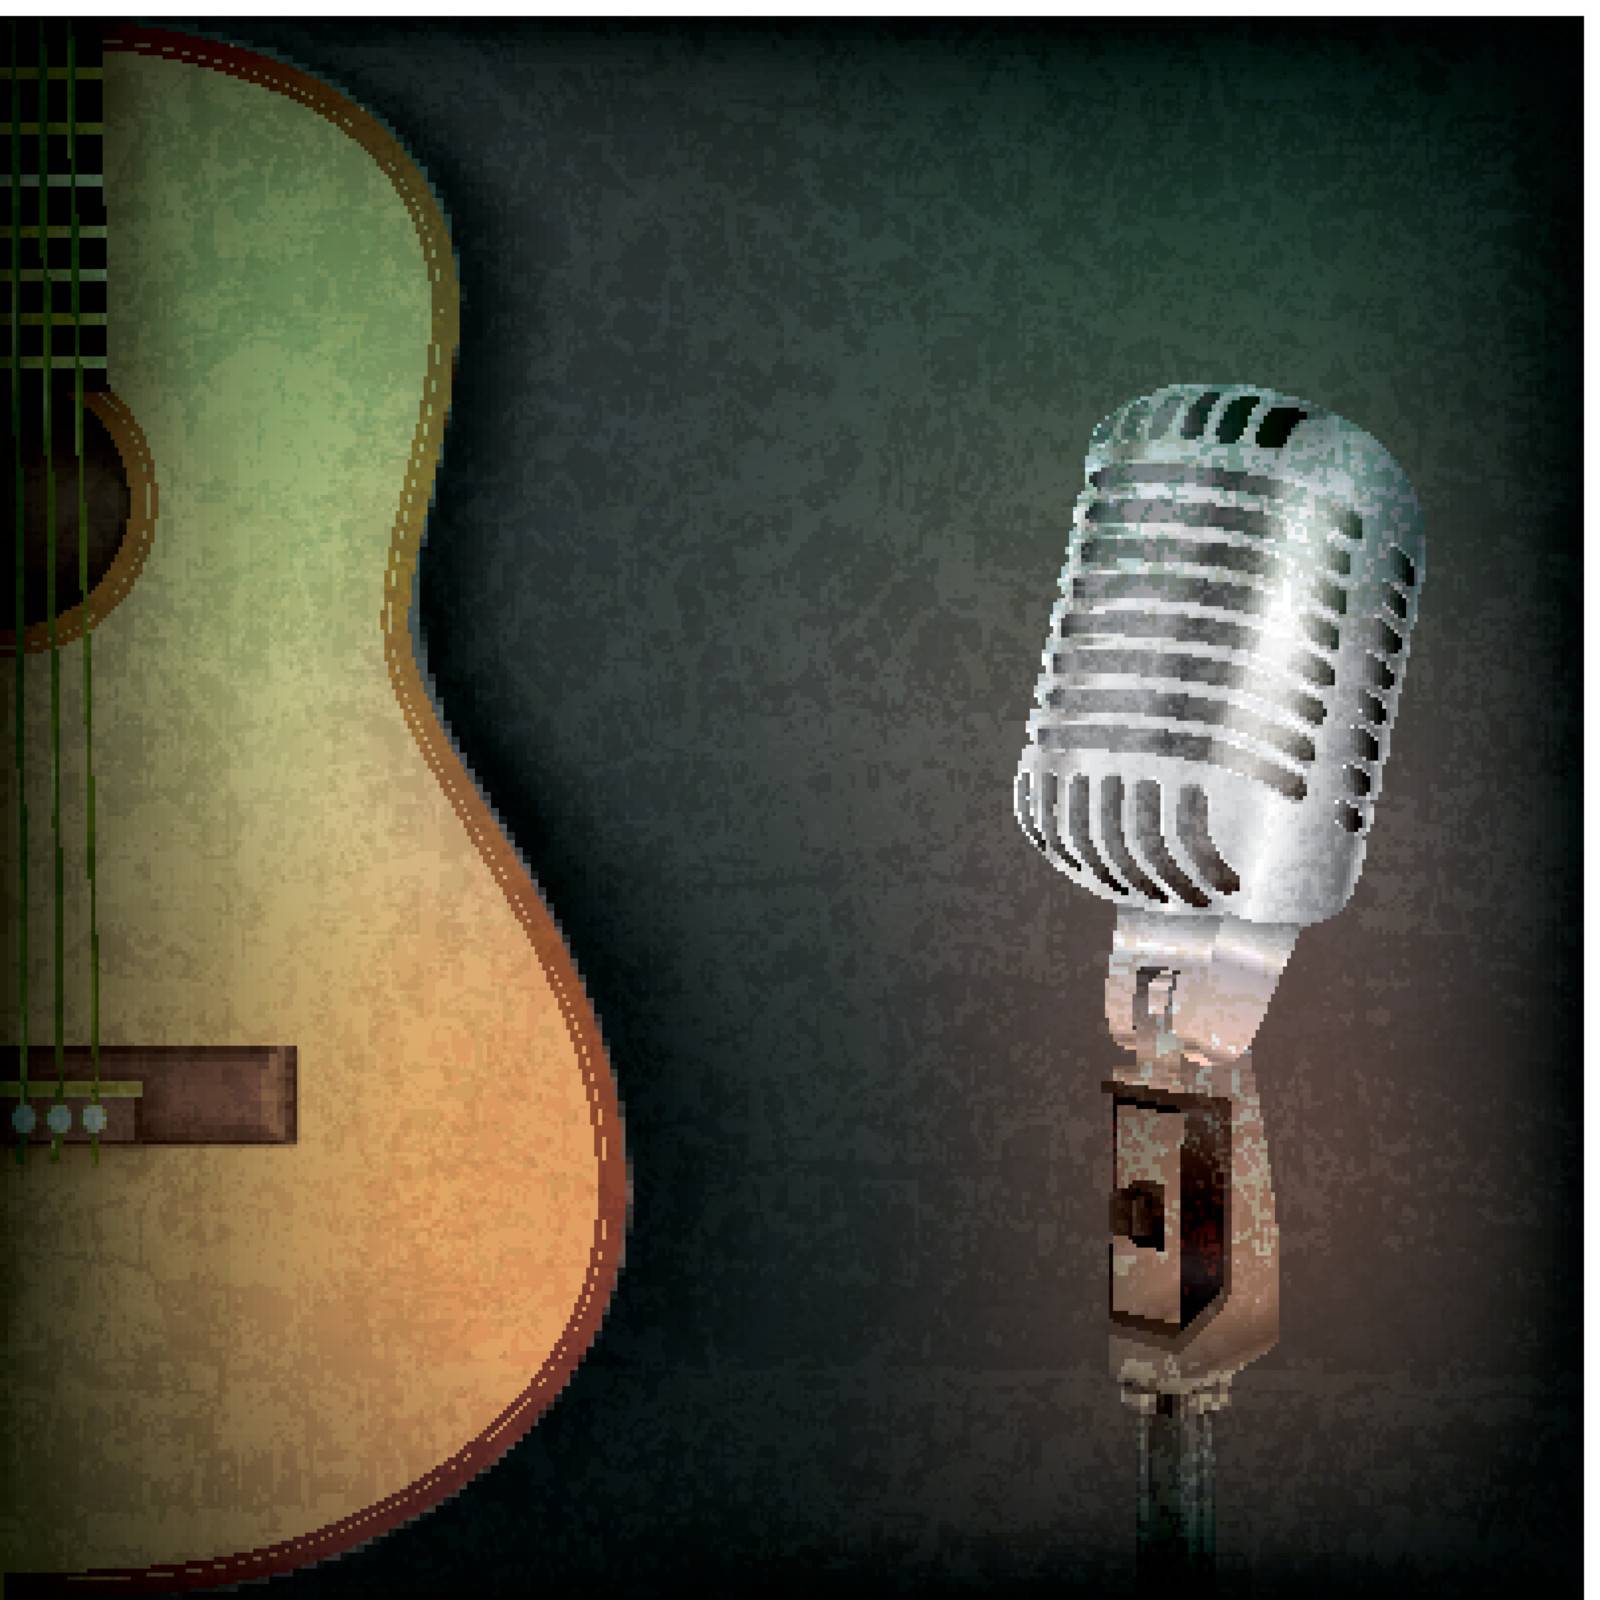 abstract music background with retro microphone and guitar by lem